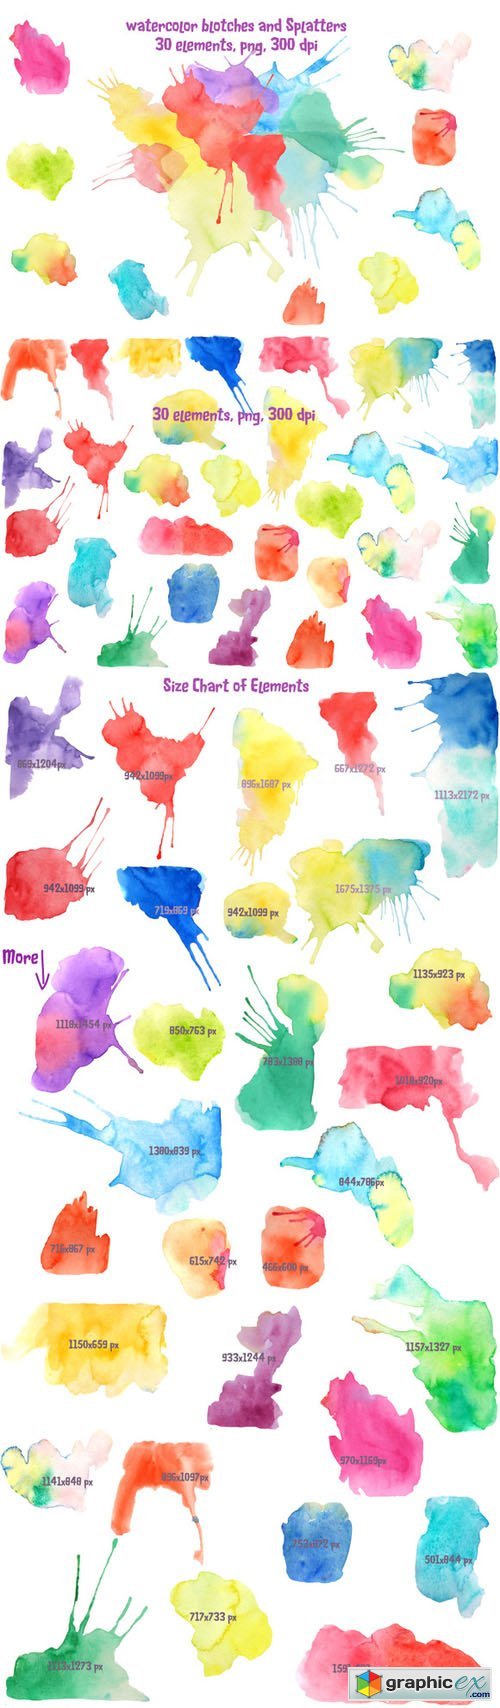 Watercolor Blotches and Splatters